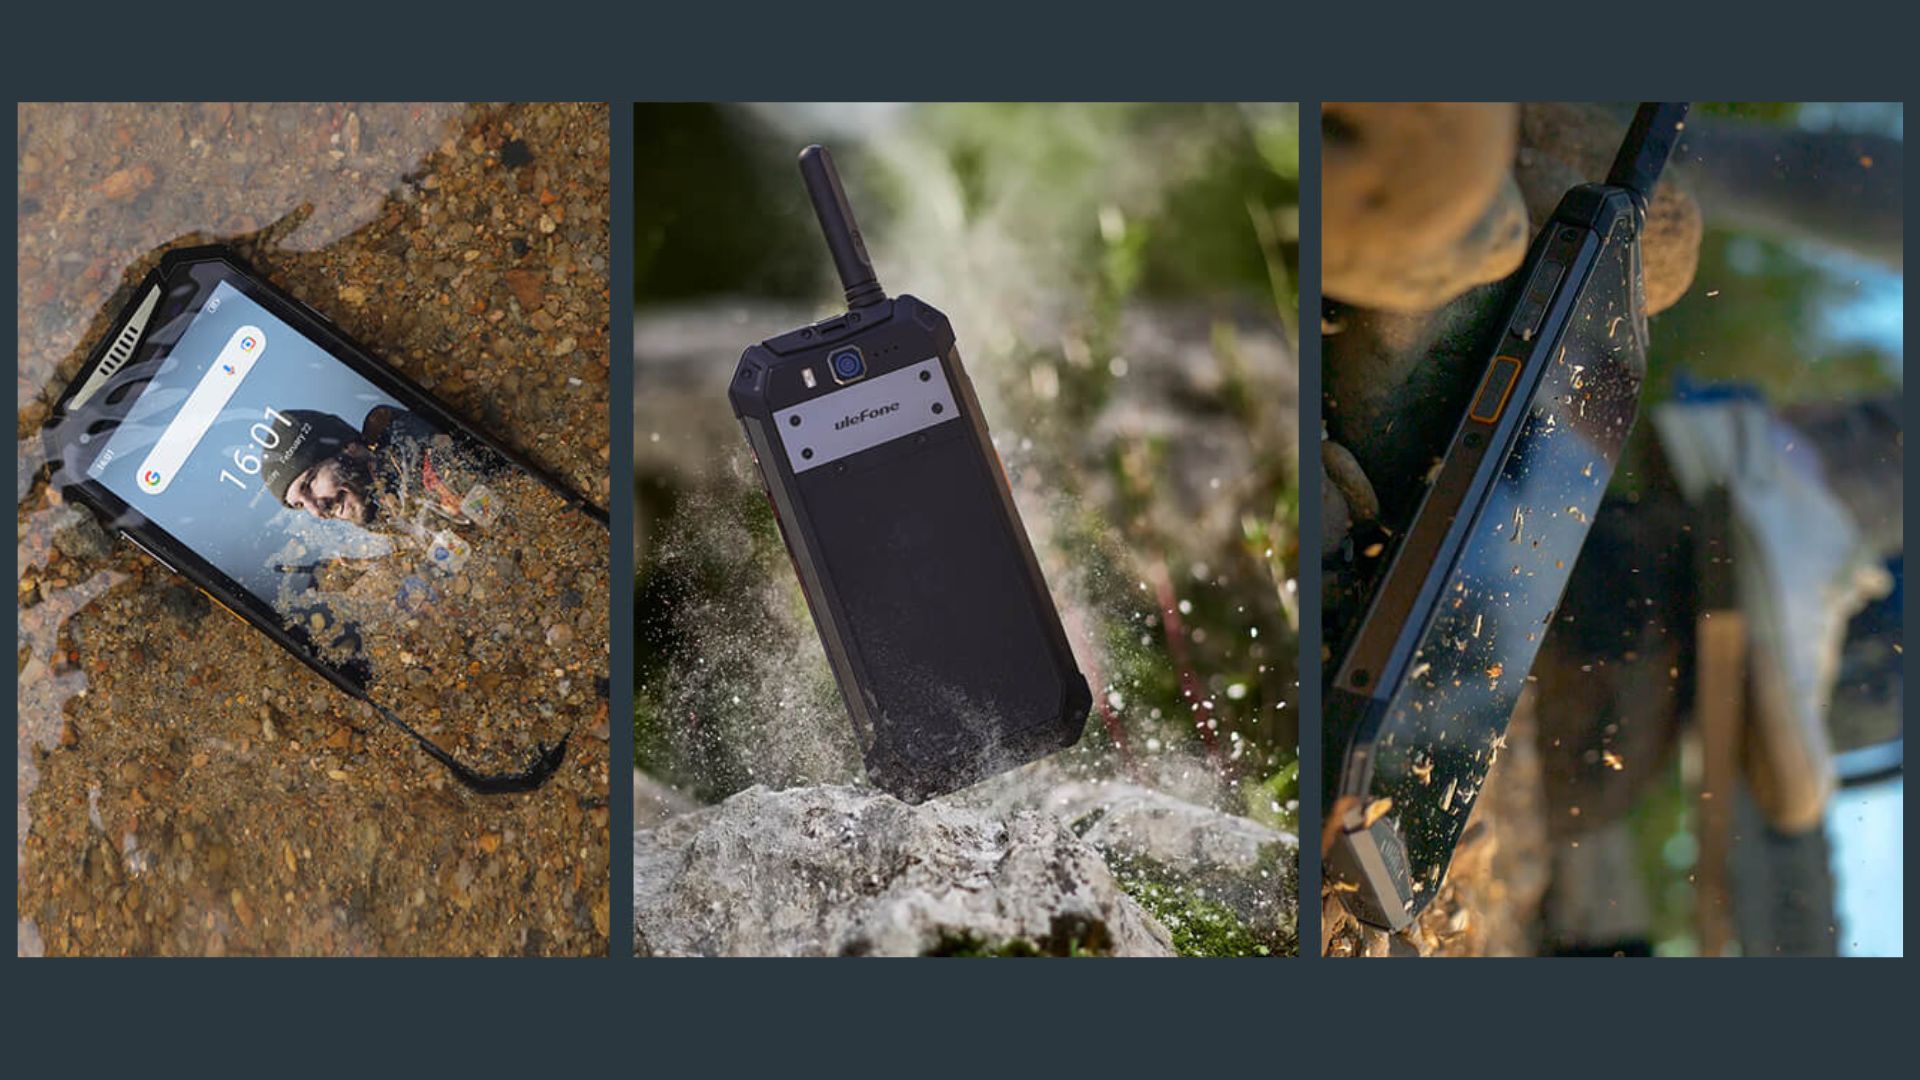 Is the CAT S75 really the world's most rugged smartphone?